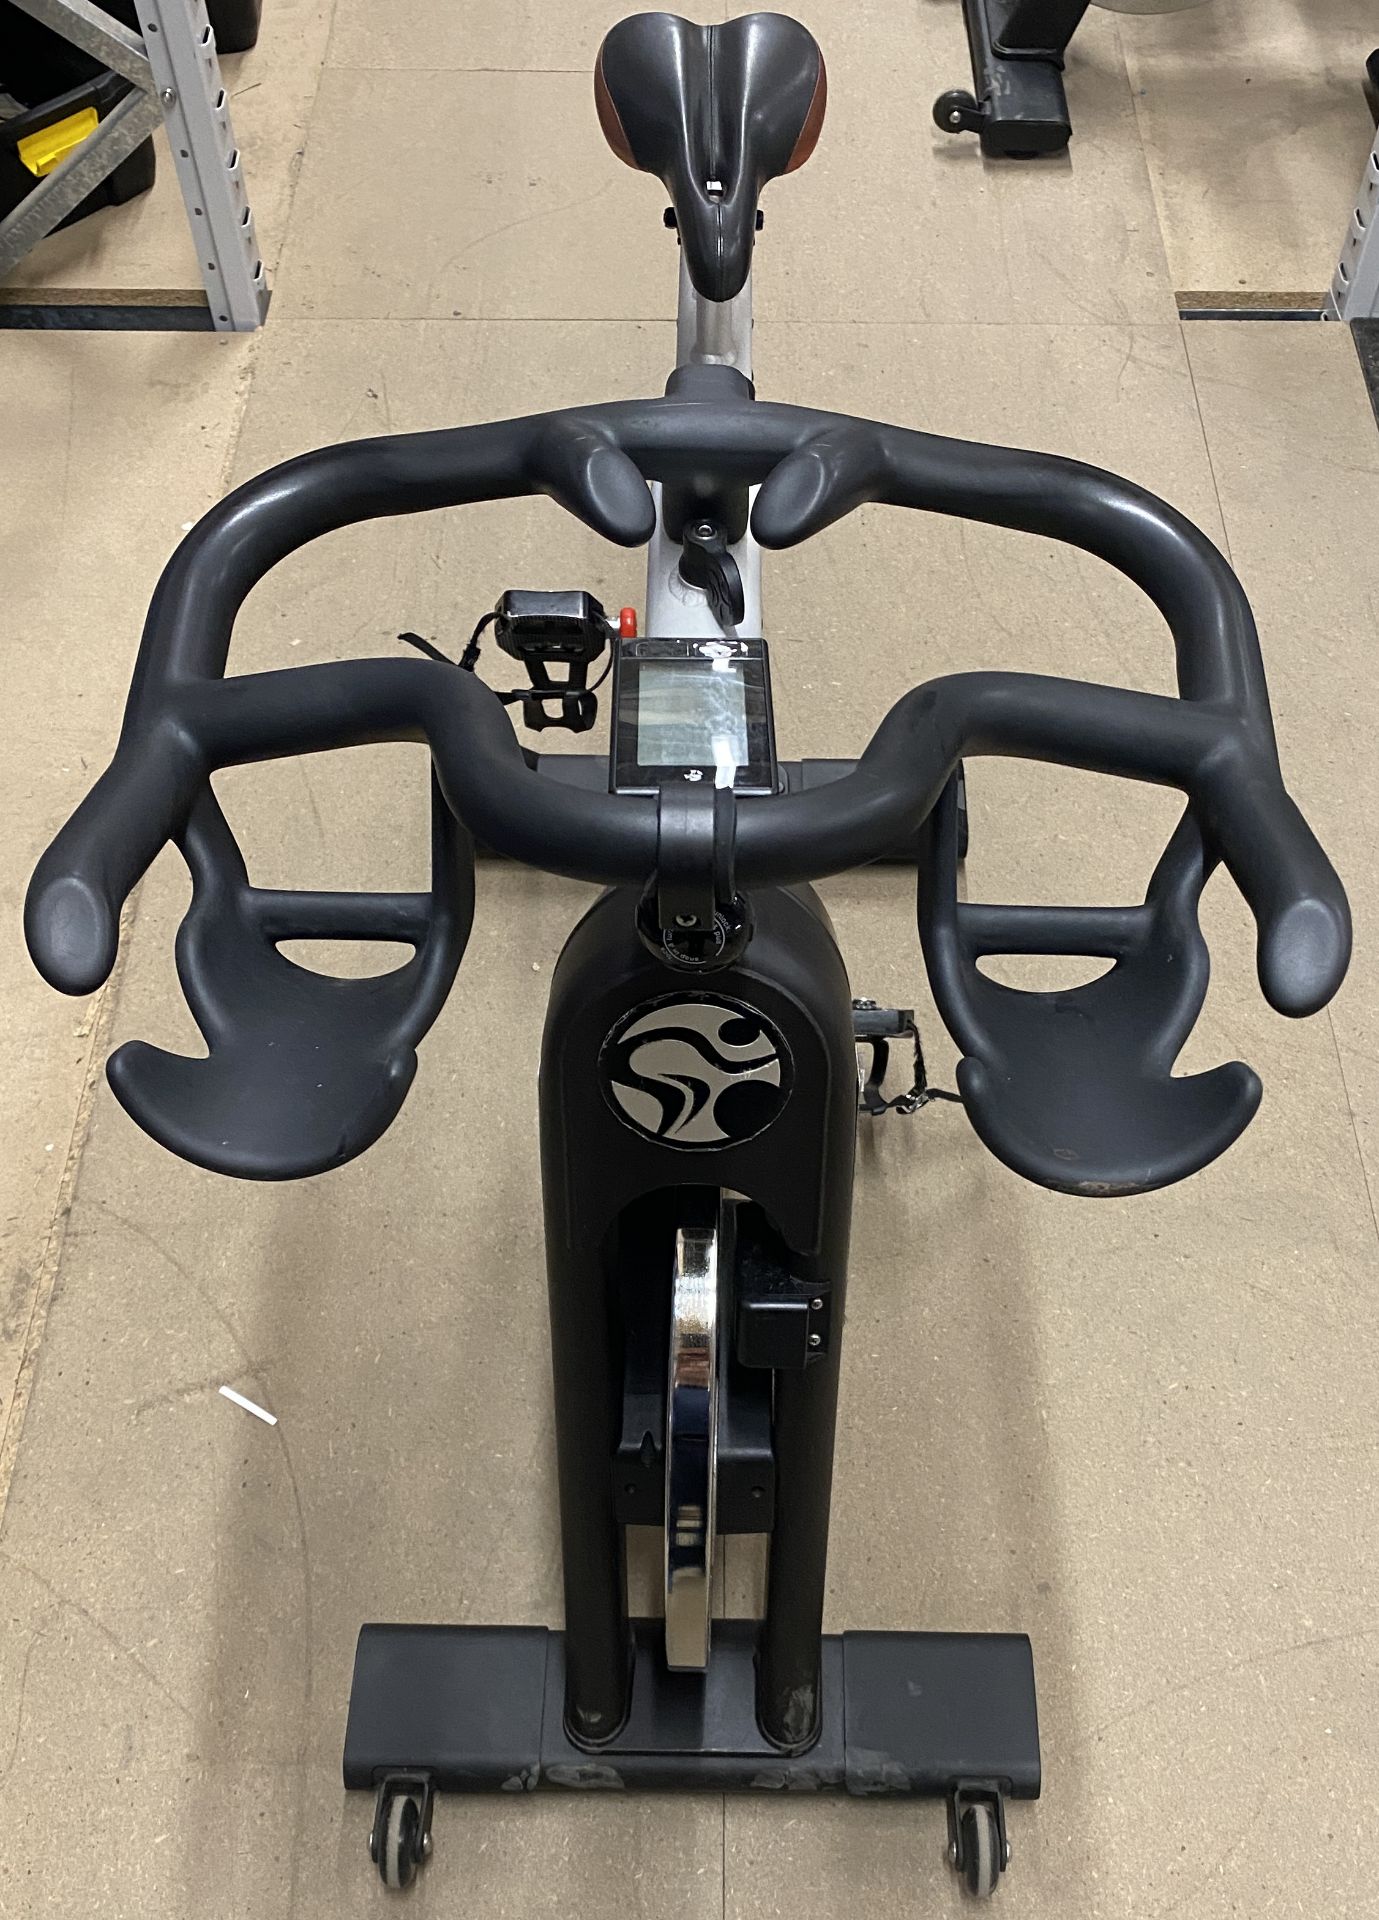 Matrix IC3 'Powered by ICG' Spin Bike - Image 3 of 7